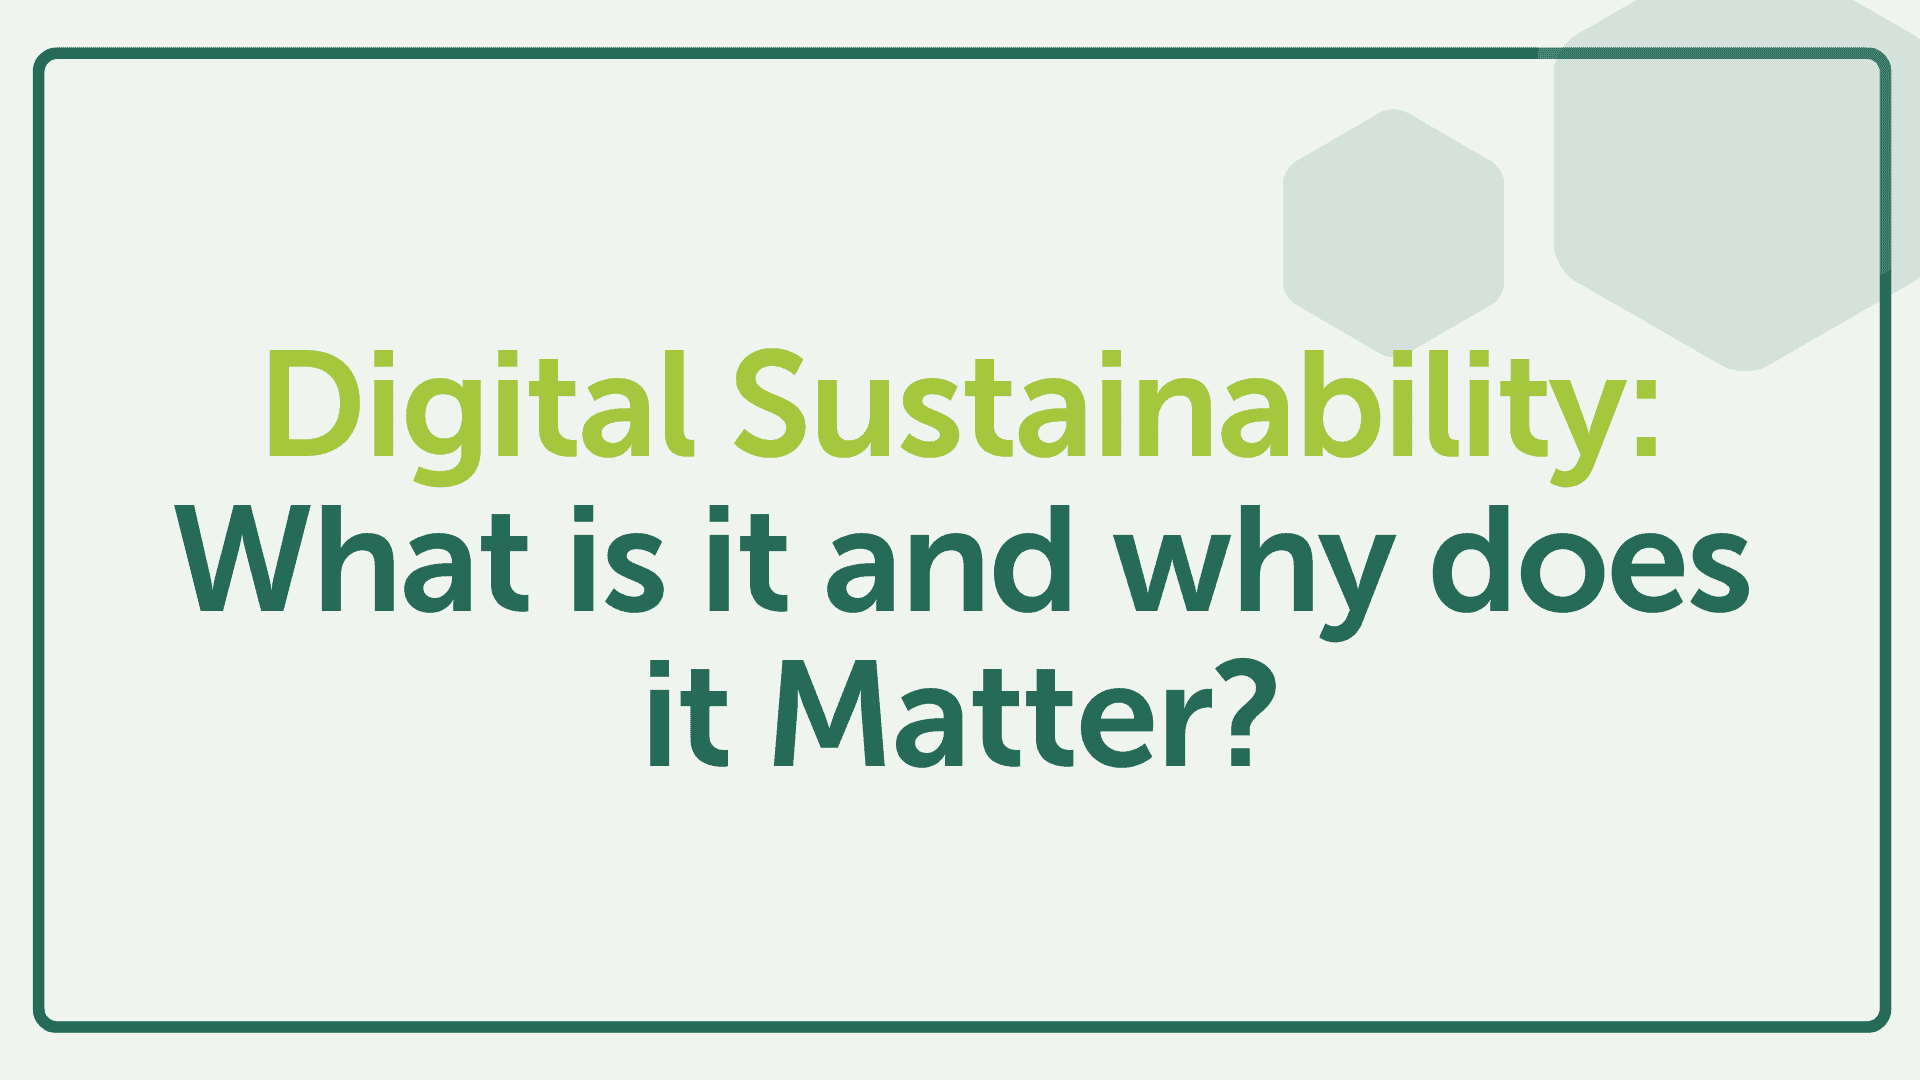 Digital Sustainability: What is it and why does it matter?